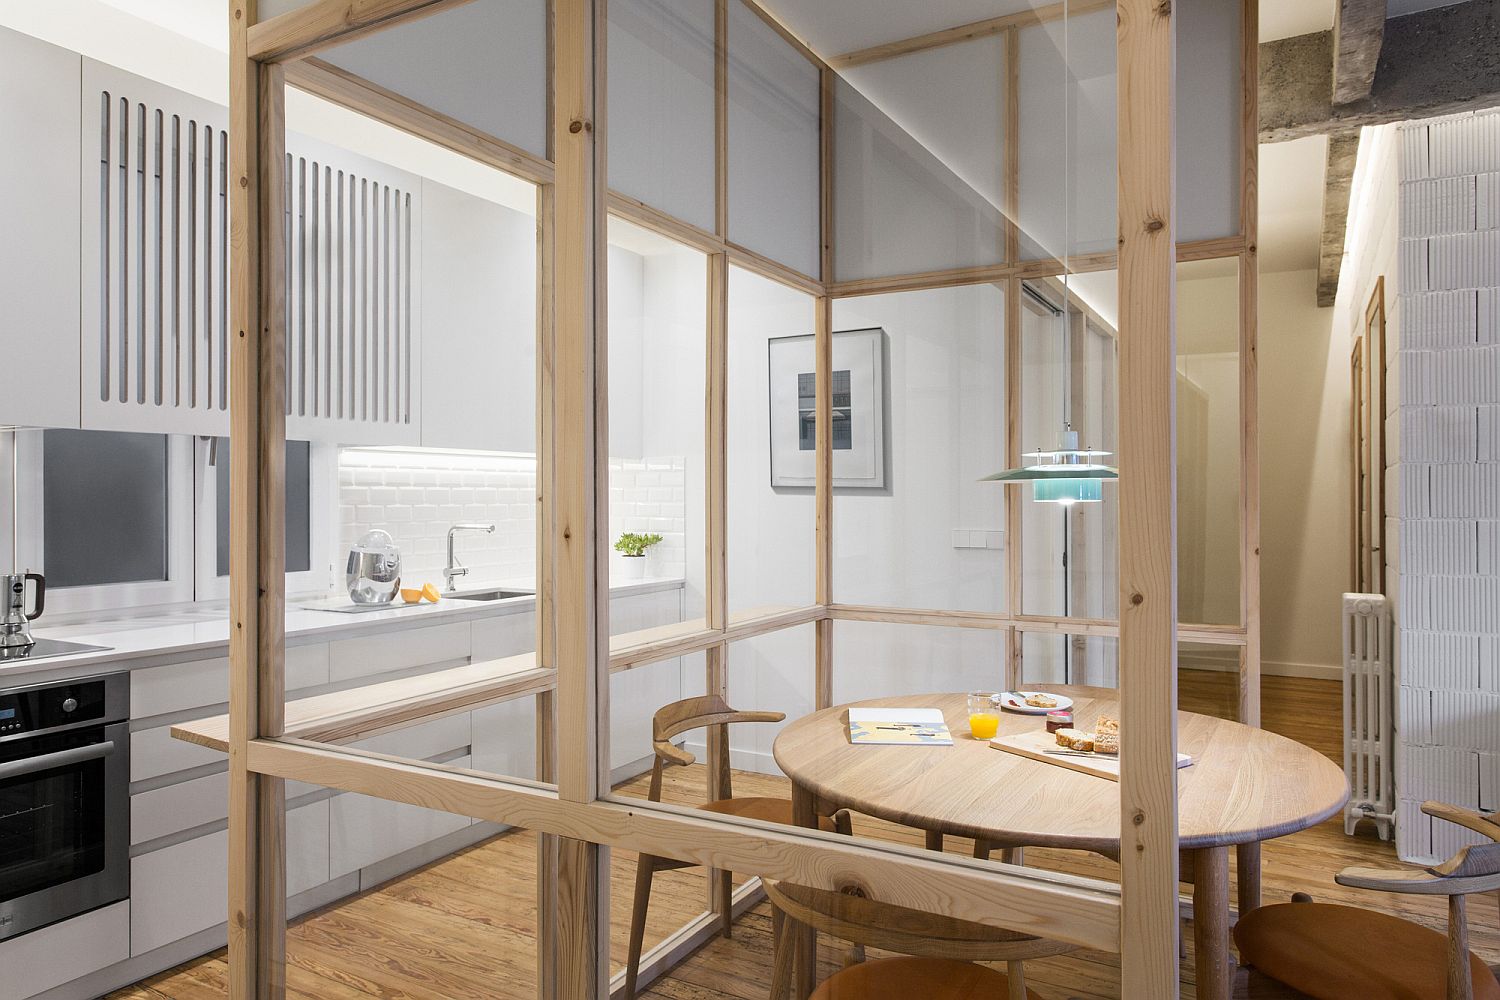 Crafting-a-dining-room-within-the-kitchen-using-wood-and-glass-partitions